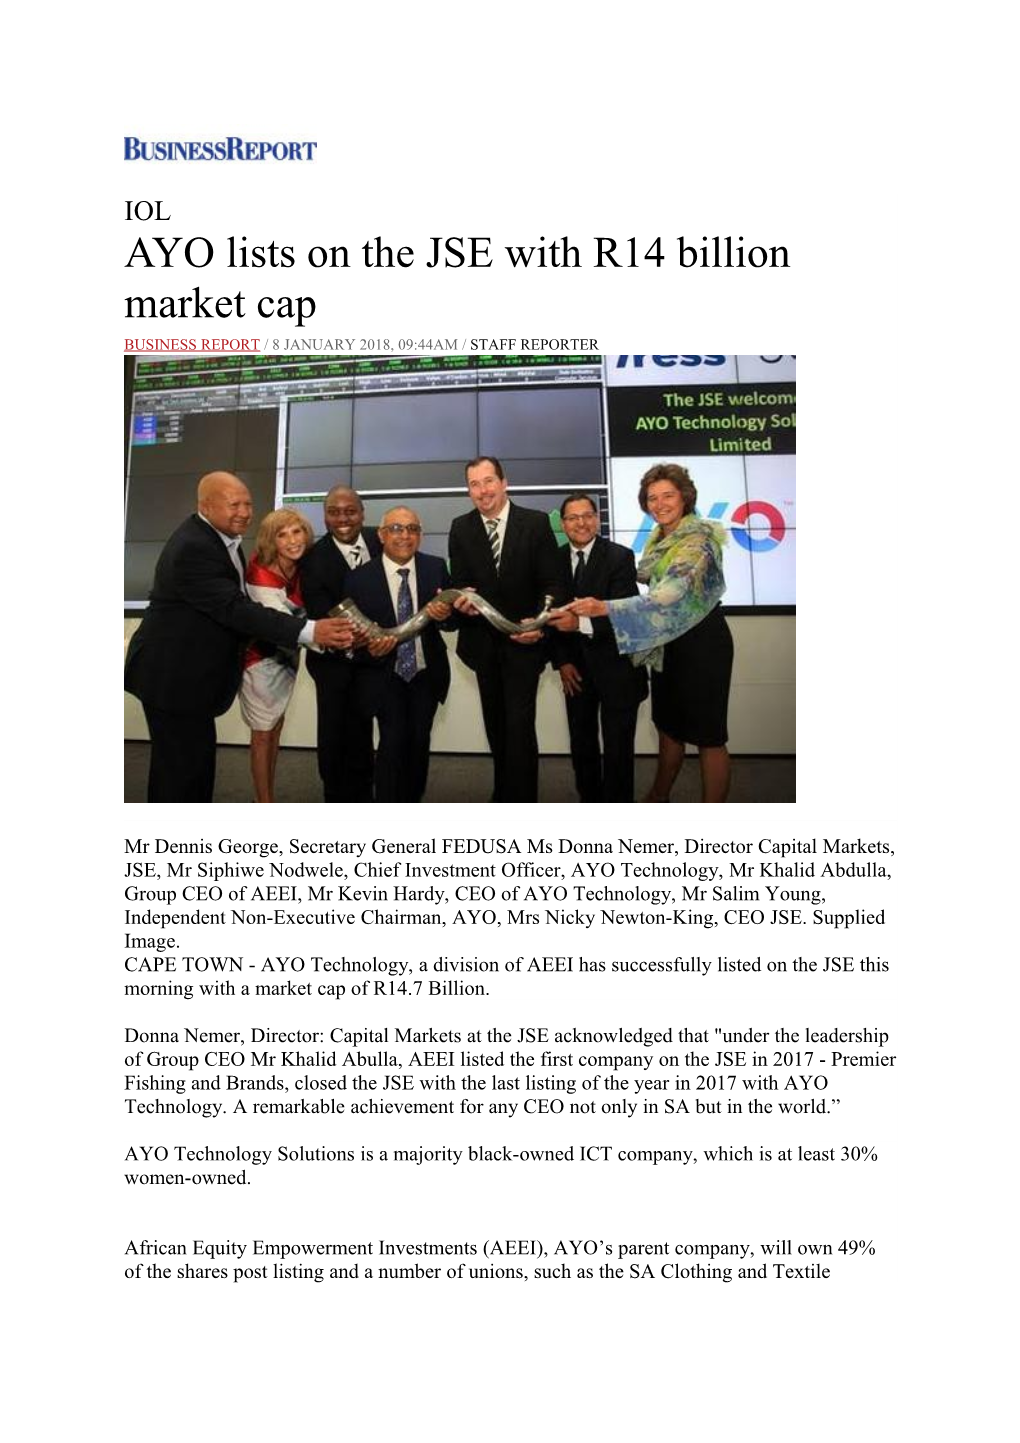 AYO Lists on the JSE with R14 Billion Market Cap